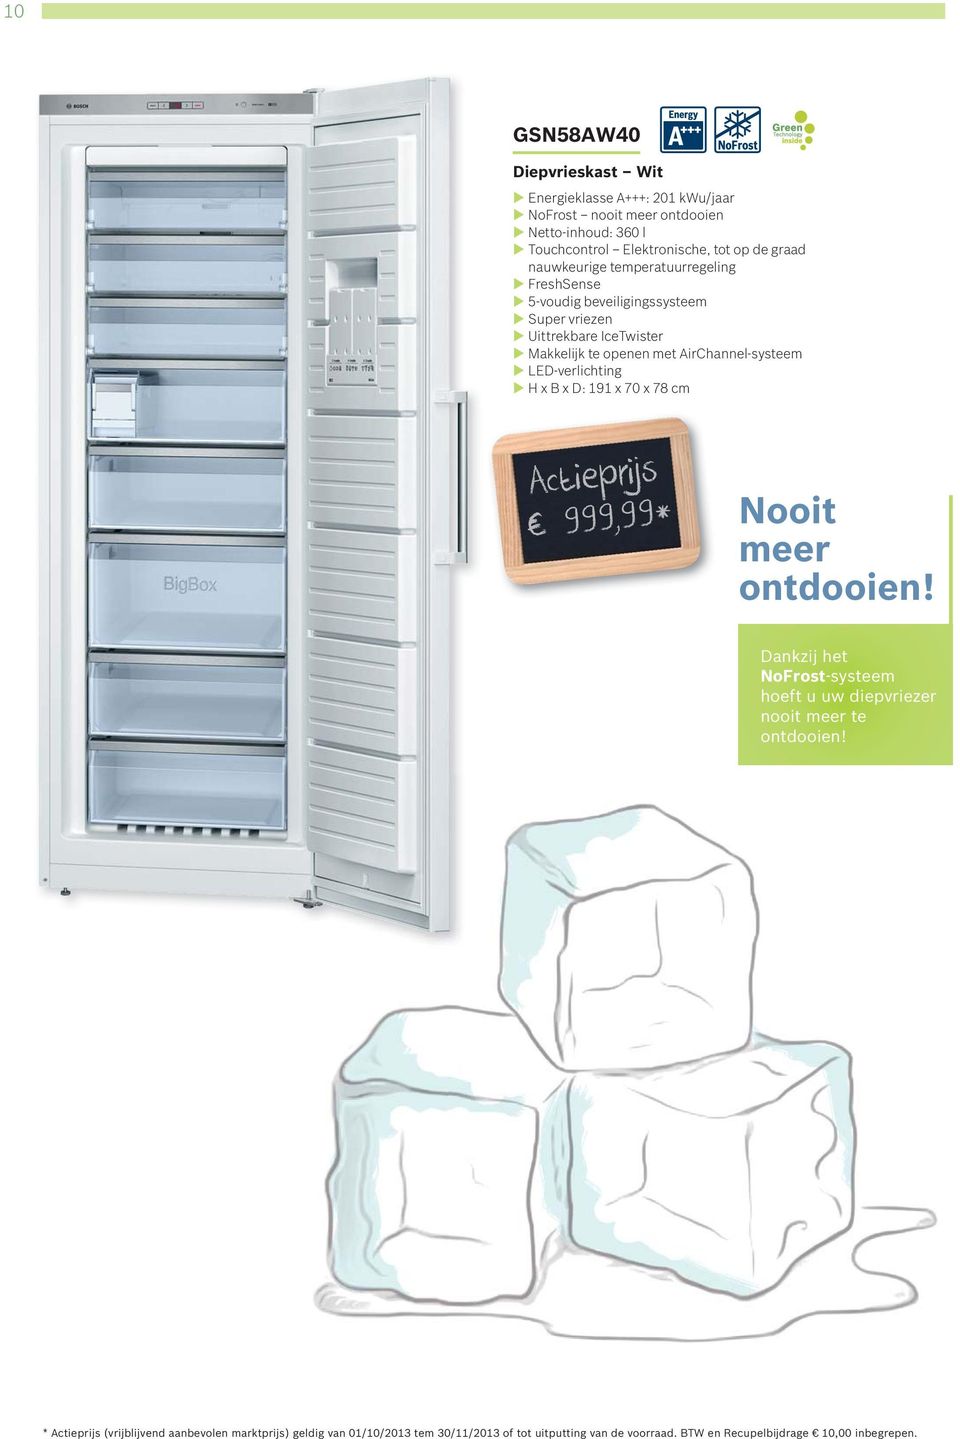 AirChannel-systeem LED-verlichting H x B x D: 191 x 70 x 78 cm 999,99* Nooit meer ontdooien!